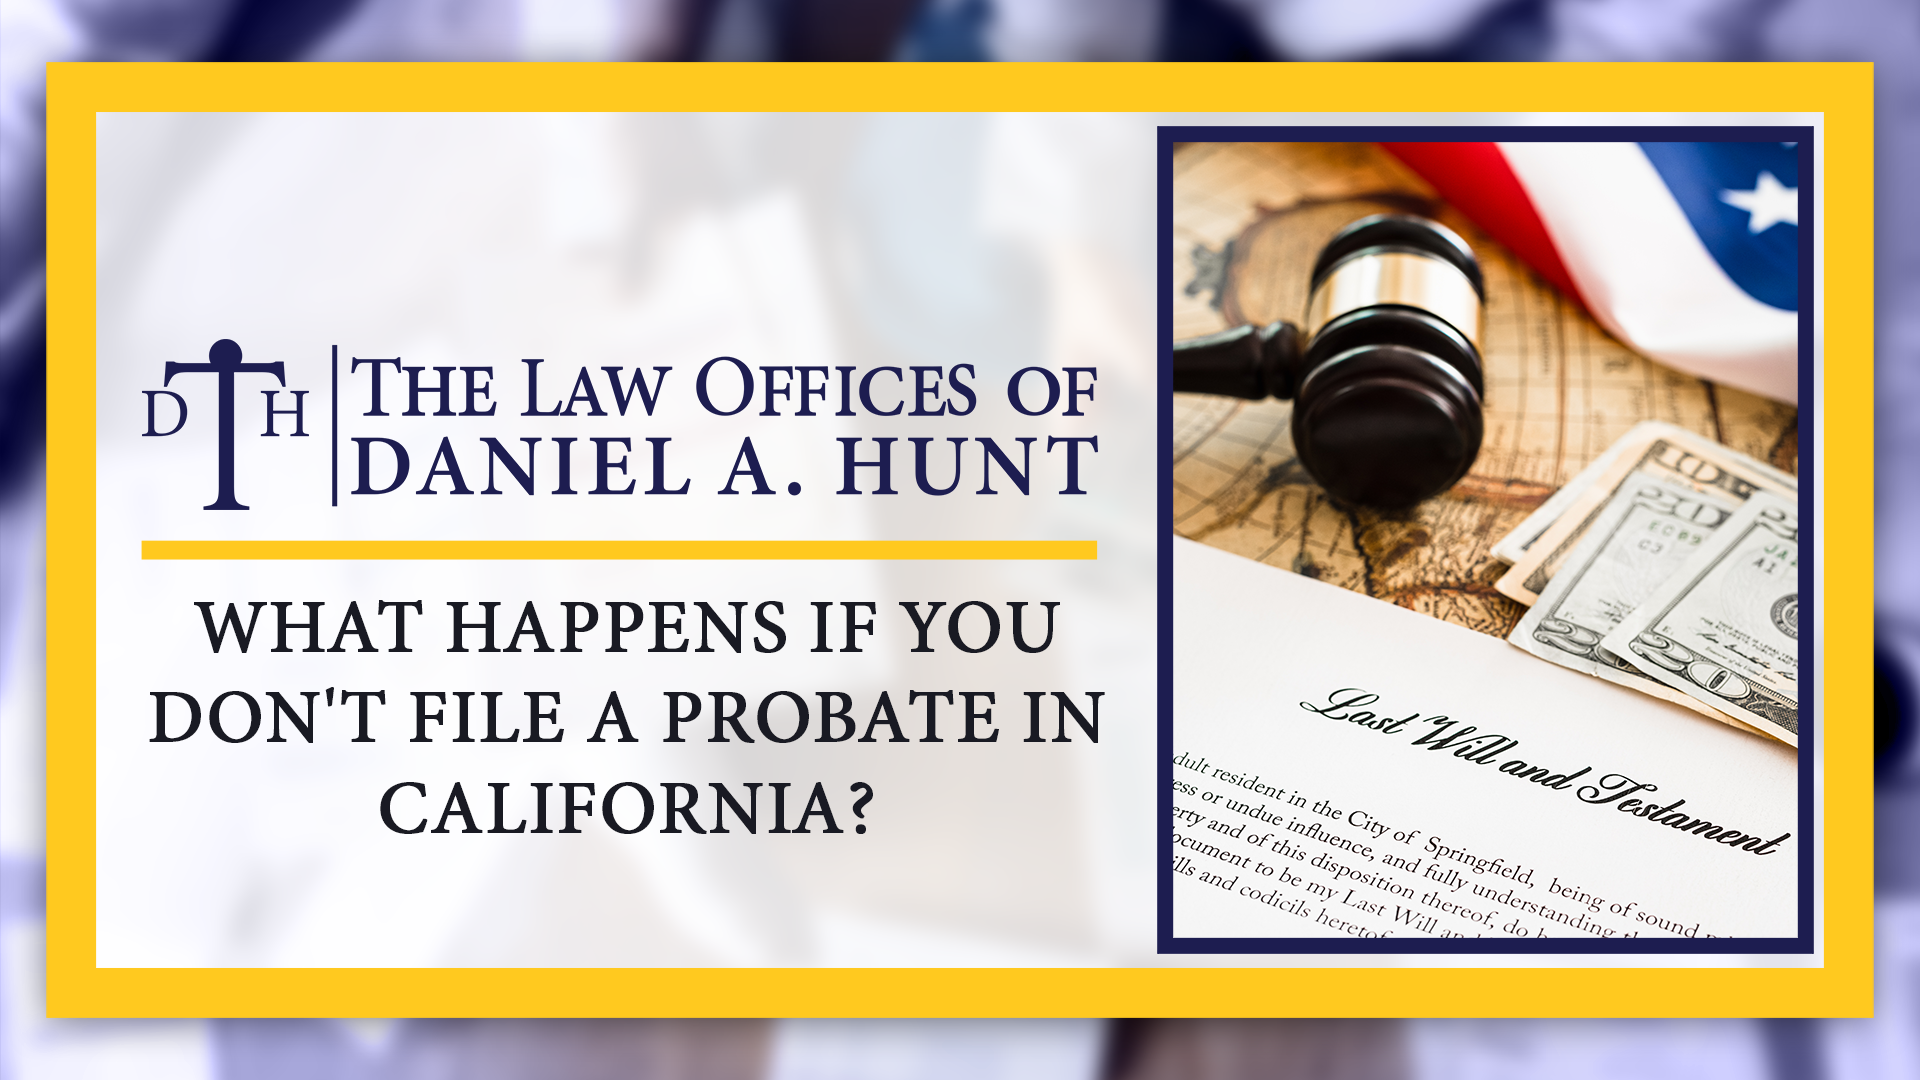 What Happens If You Don't File a Probate in California